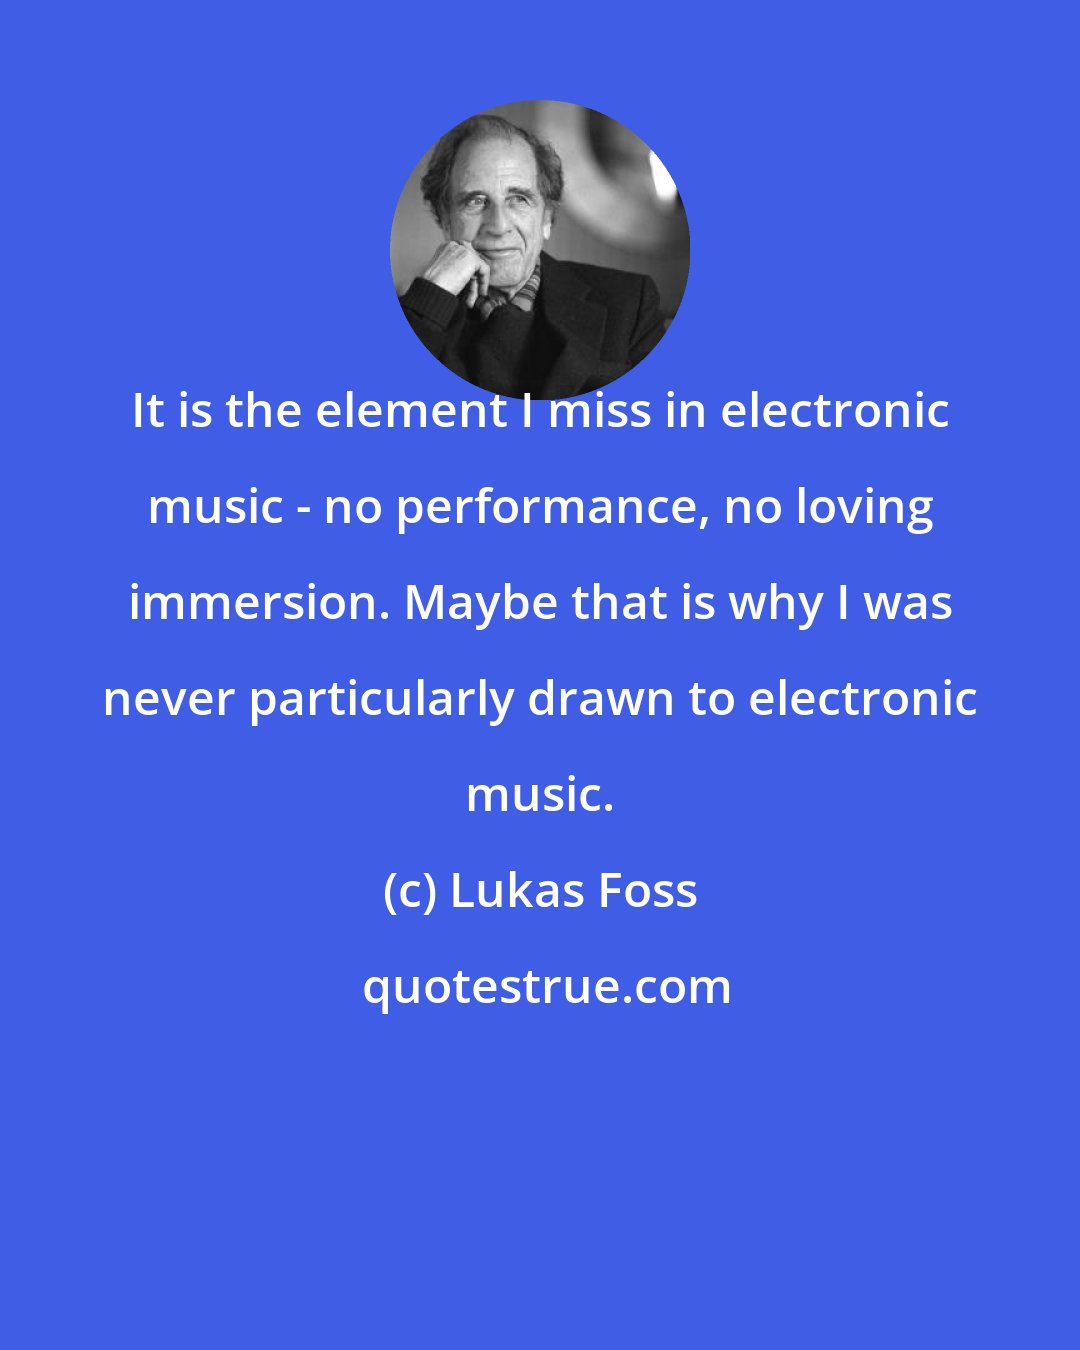 Lukas Foss: It is the element I miss in electronic music - no performance, no loving immersion. Maybe that is why I was never particularly drawn to electronic music.